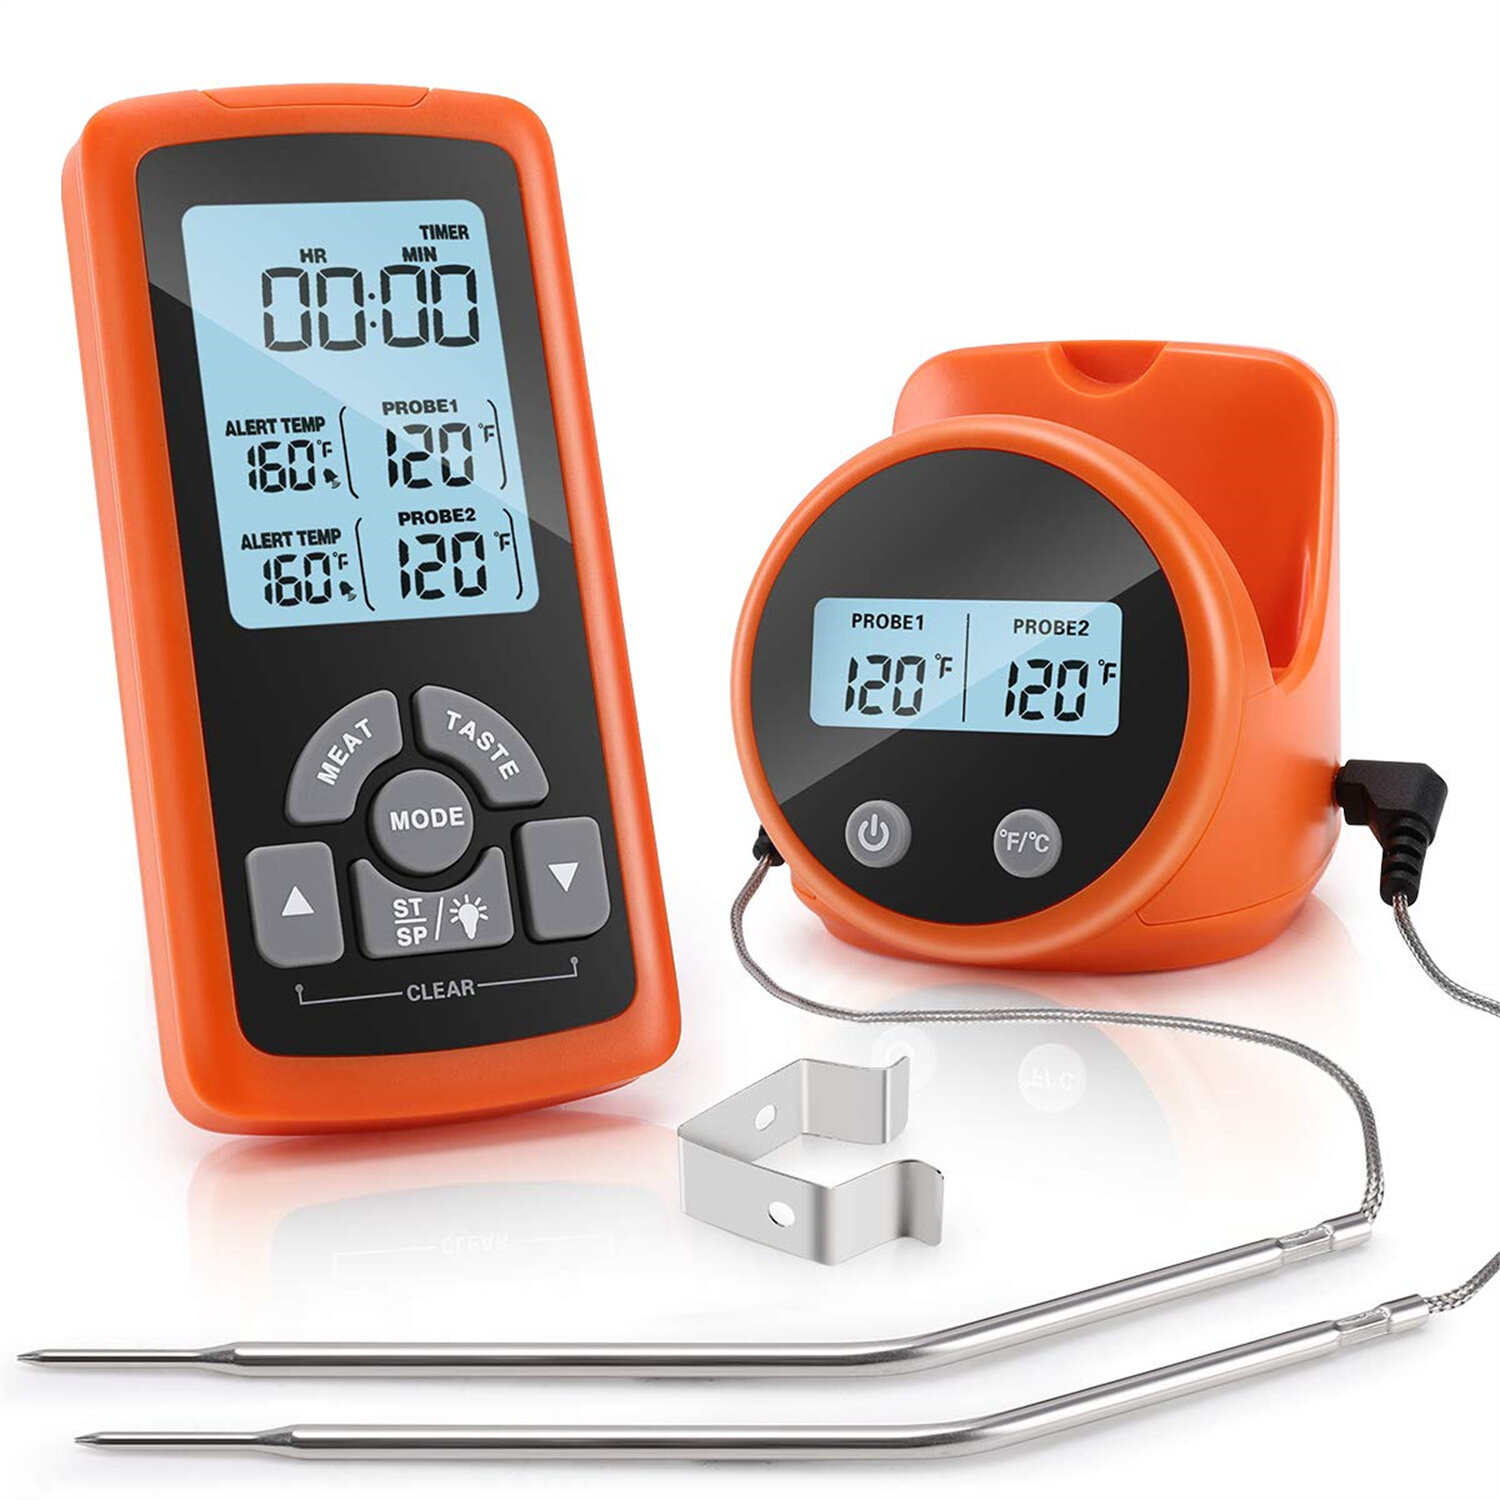 Oven BBQ Meat It Wireless Thermometer and Cooking Sensor Meat Probe for Grill 